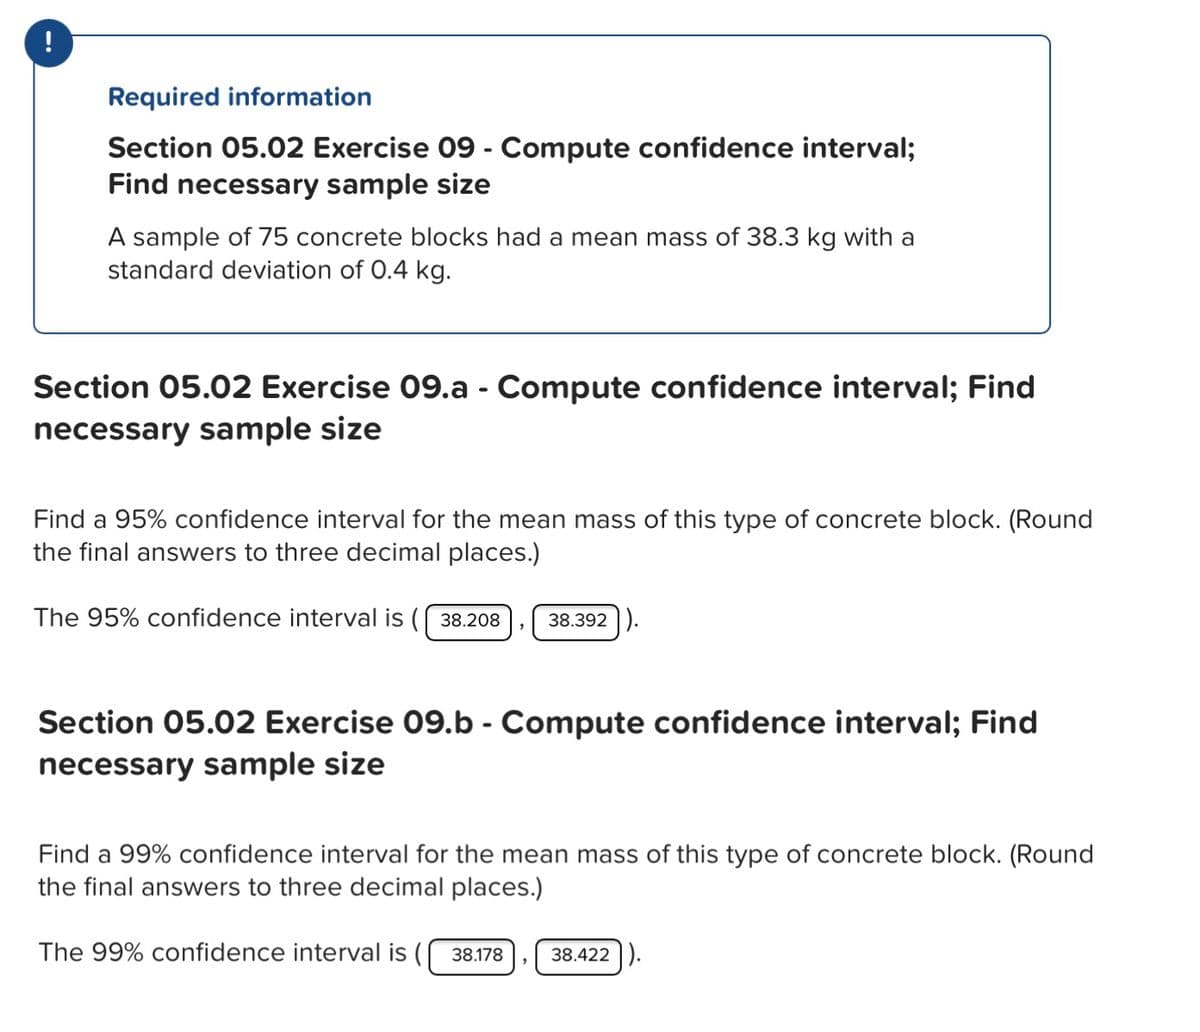 Required information
Section 05.02 Exercise 09 - Compute confidence interval;
Find necessary sample size
A sample of 75 concrete blocks had a mean mass of 38.3 kg with a
standard deviation of 0.4 kg.
Section 05.02 Exercise 09.a - Compute confidence interval; Find
necessary sample size
Find a 95% confidence interval for the mean mass of this type of concrete block. (Round
the final answers to three decimal places.)
The 95% confidence interval is ( 38.208
38.392 ).
Section 05.02 Exercise 09.b - Compute confidence interval; Find
necessary sample size
Find a 99% confidence interval for the mean mass of this type of concrete block. (Round
the final answers to three decimal places.)
The 99% confidence interval is (
38.178
38.422 ).
